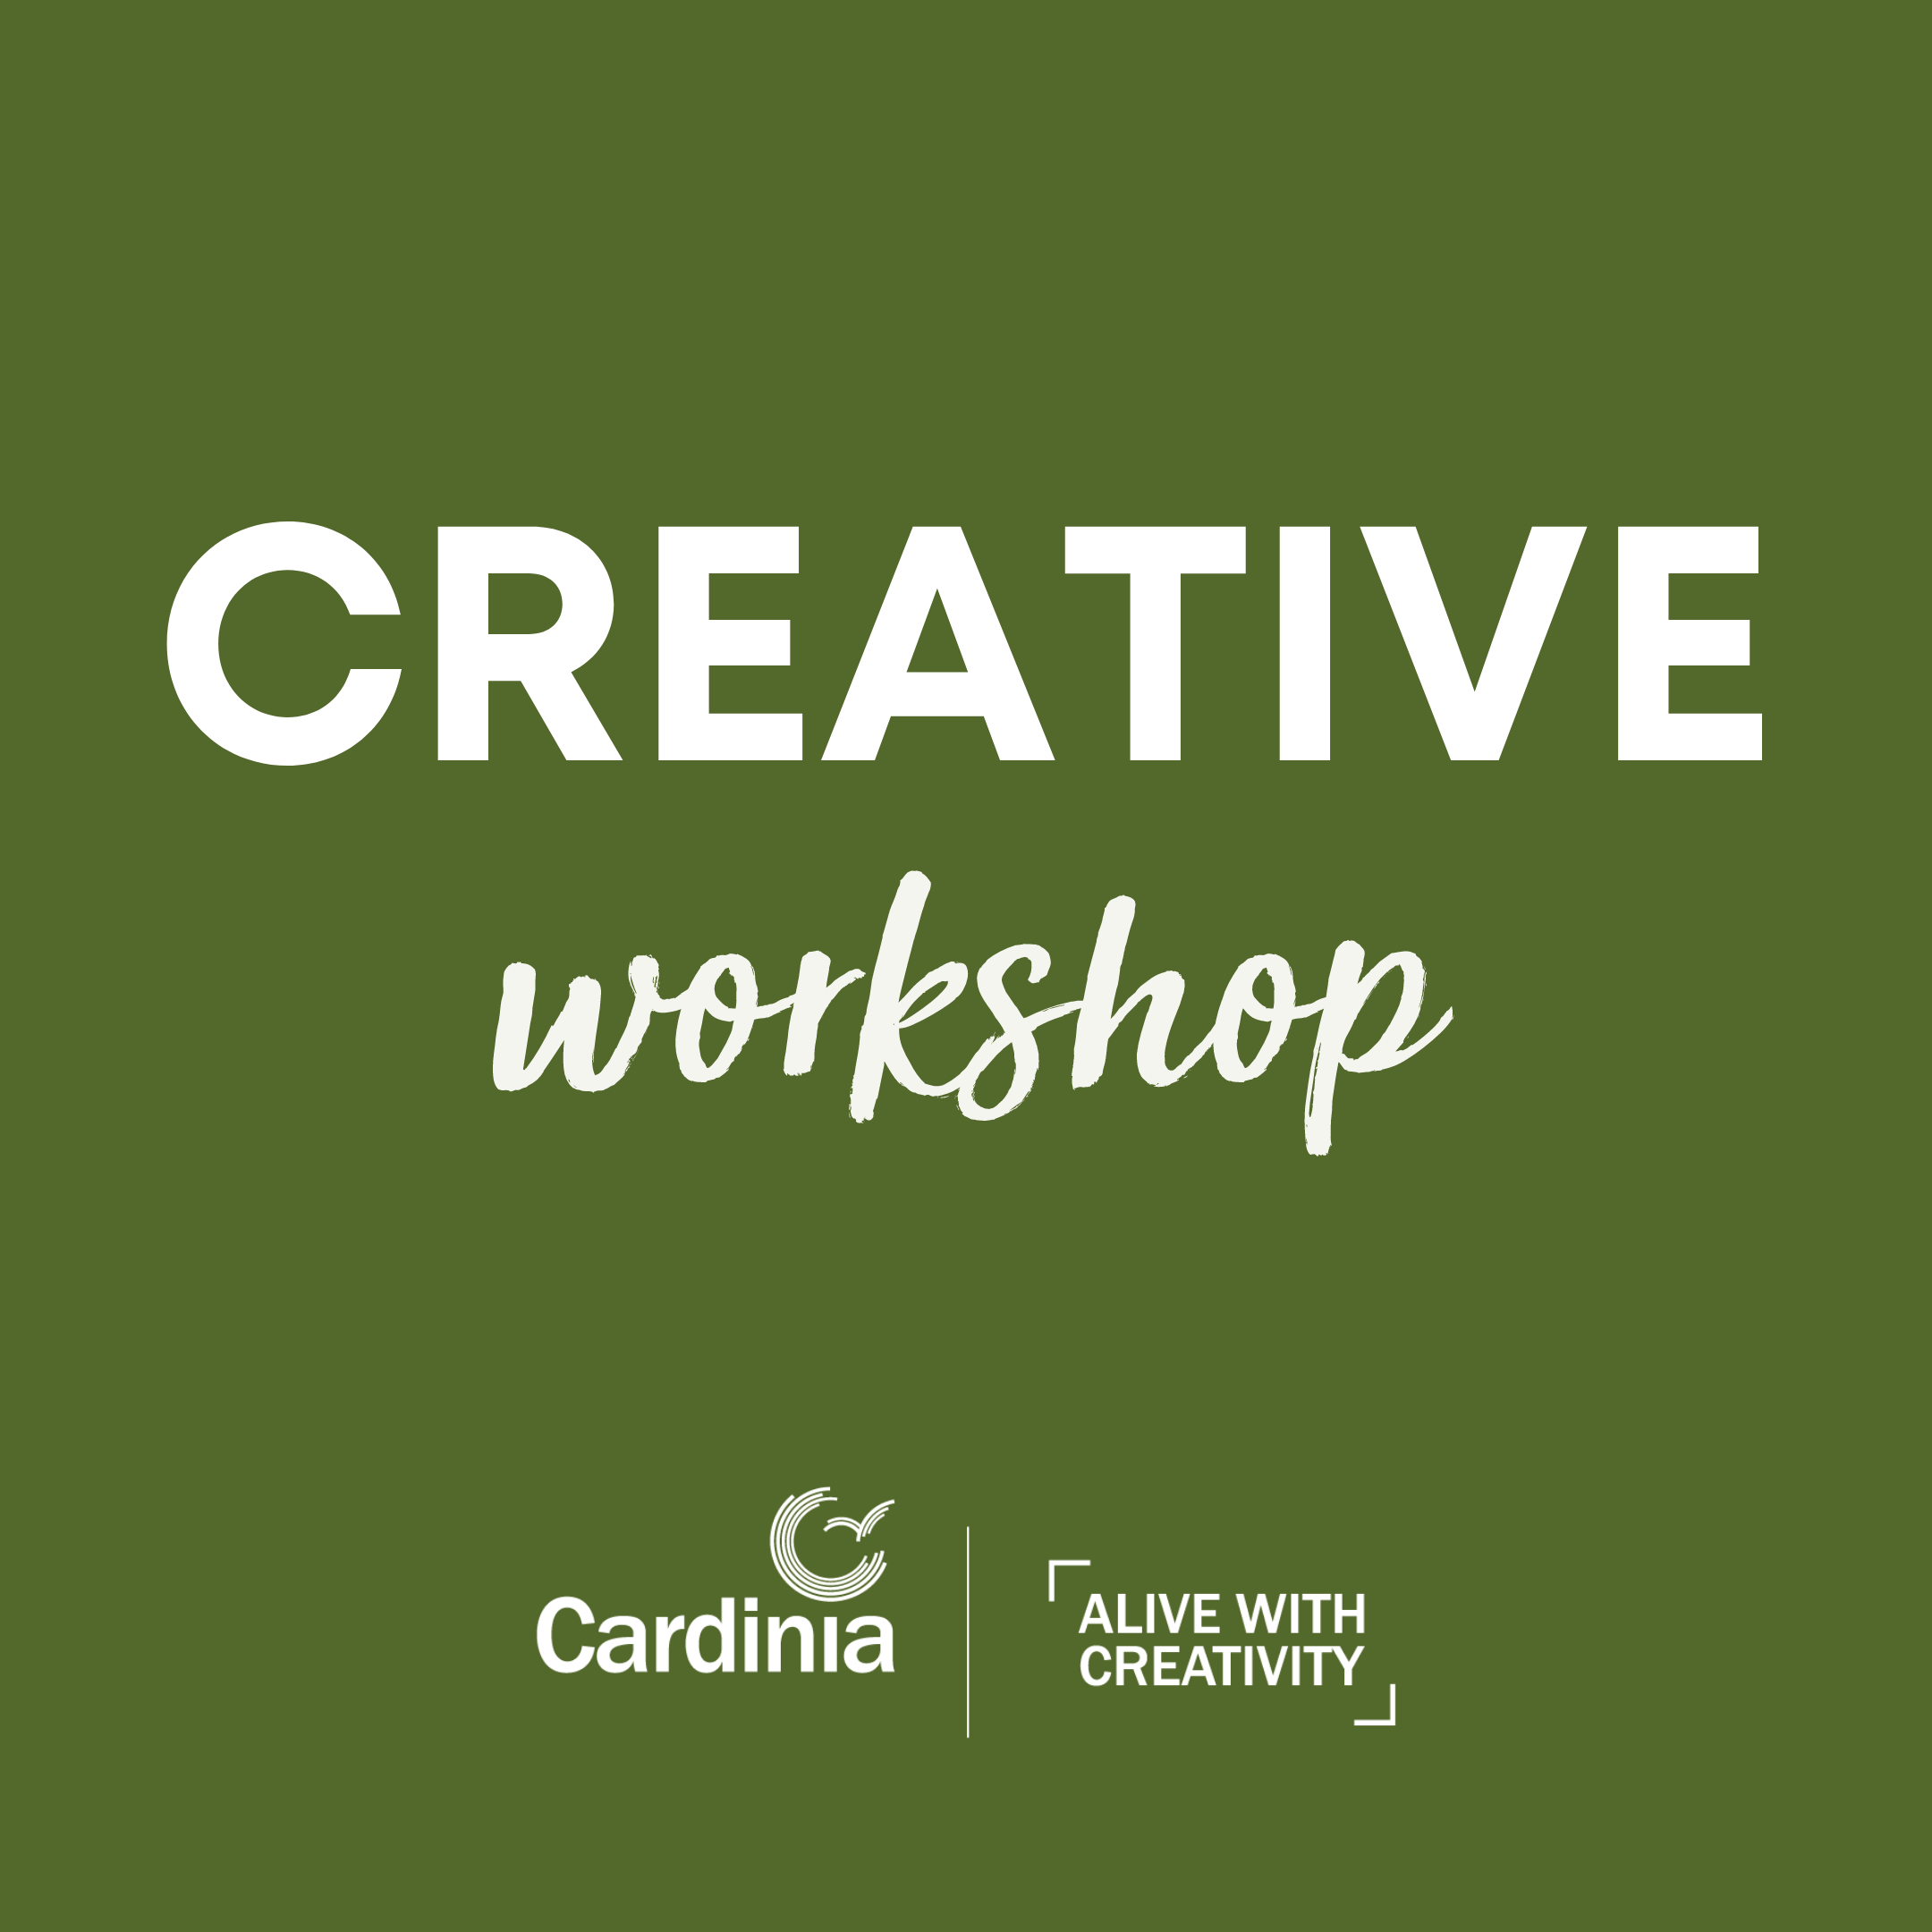 Creative and skills development workshops, delivered every Wednesday.